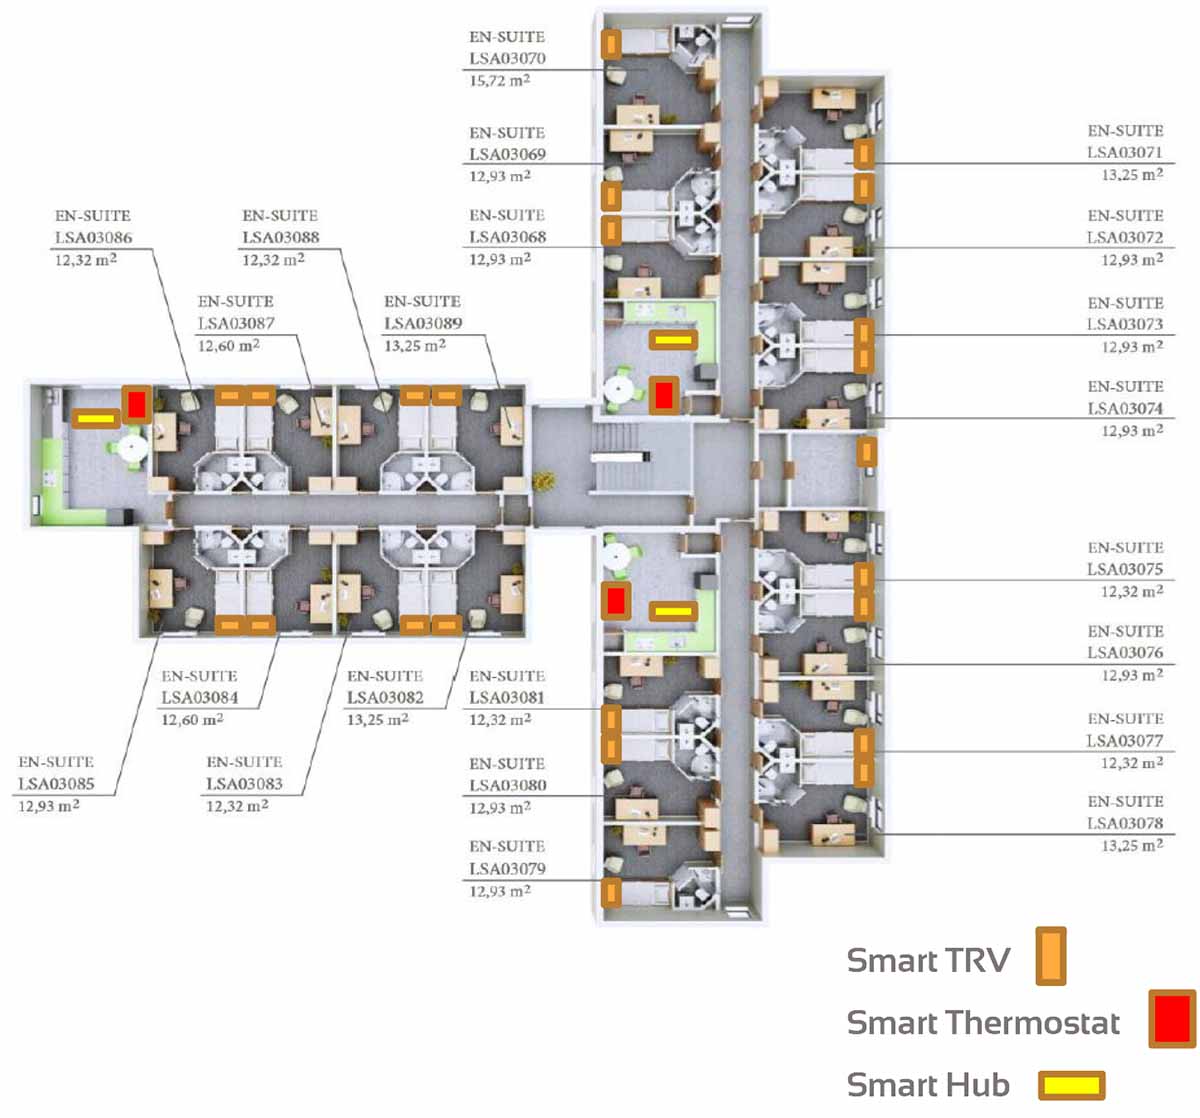 Accommodation block layout with controls